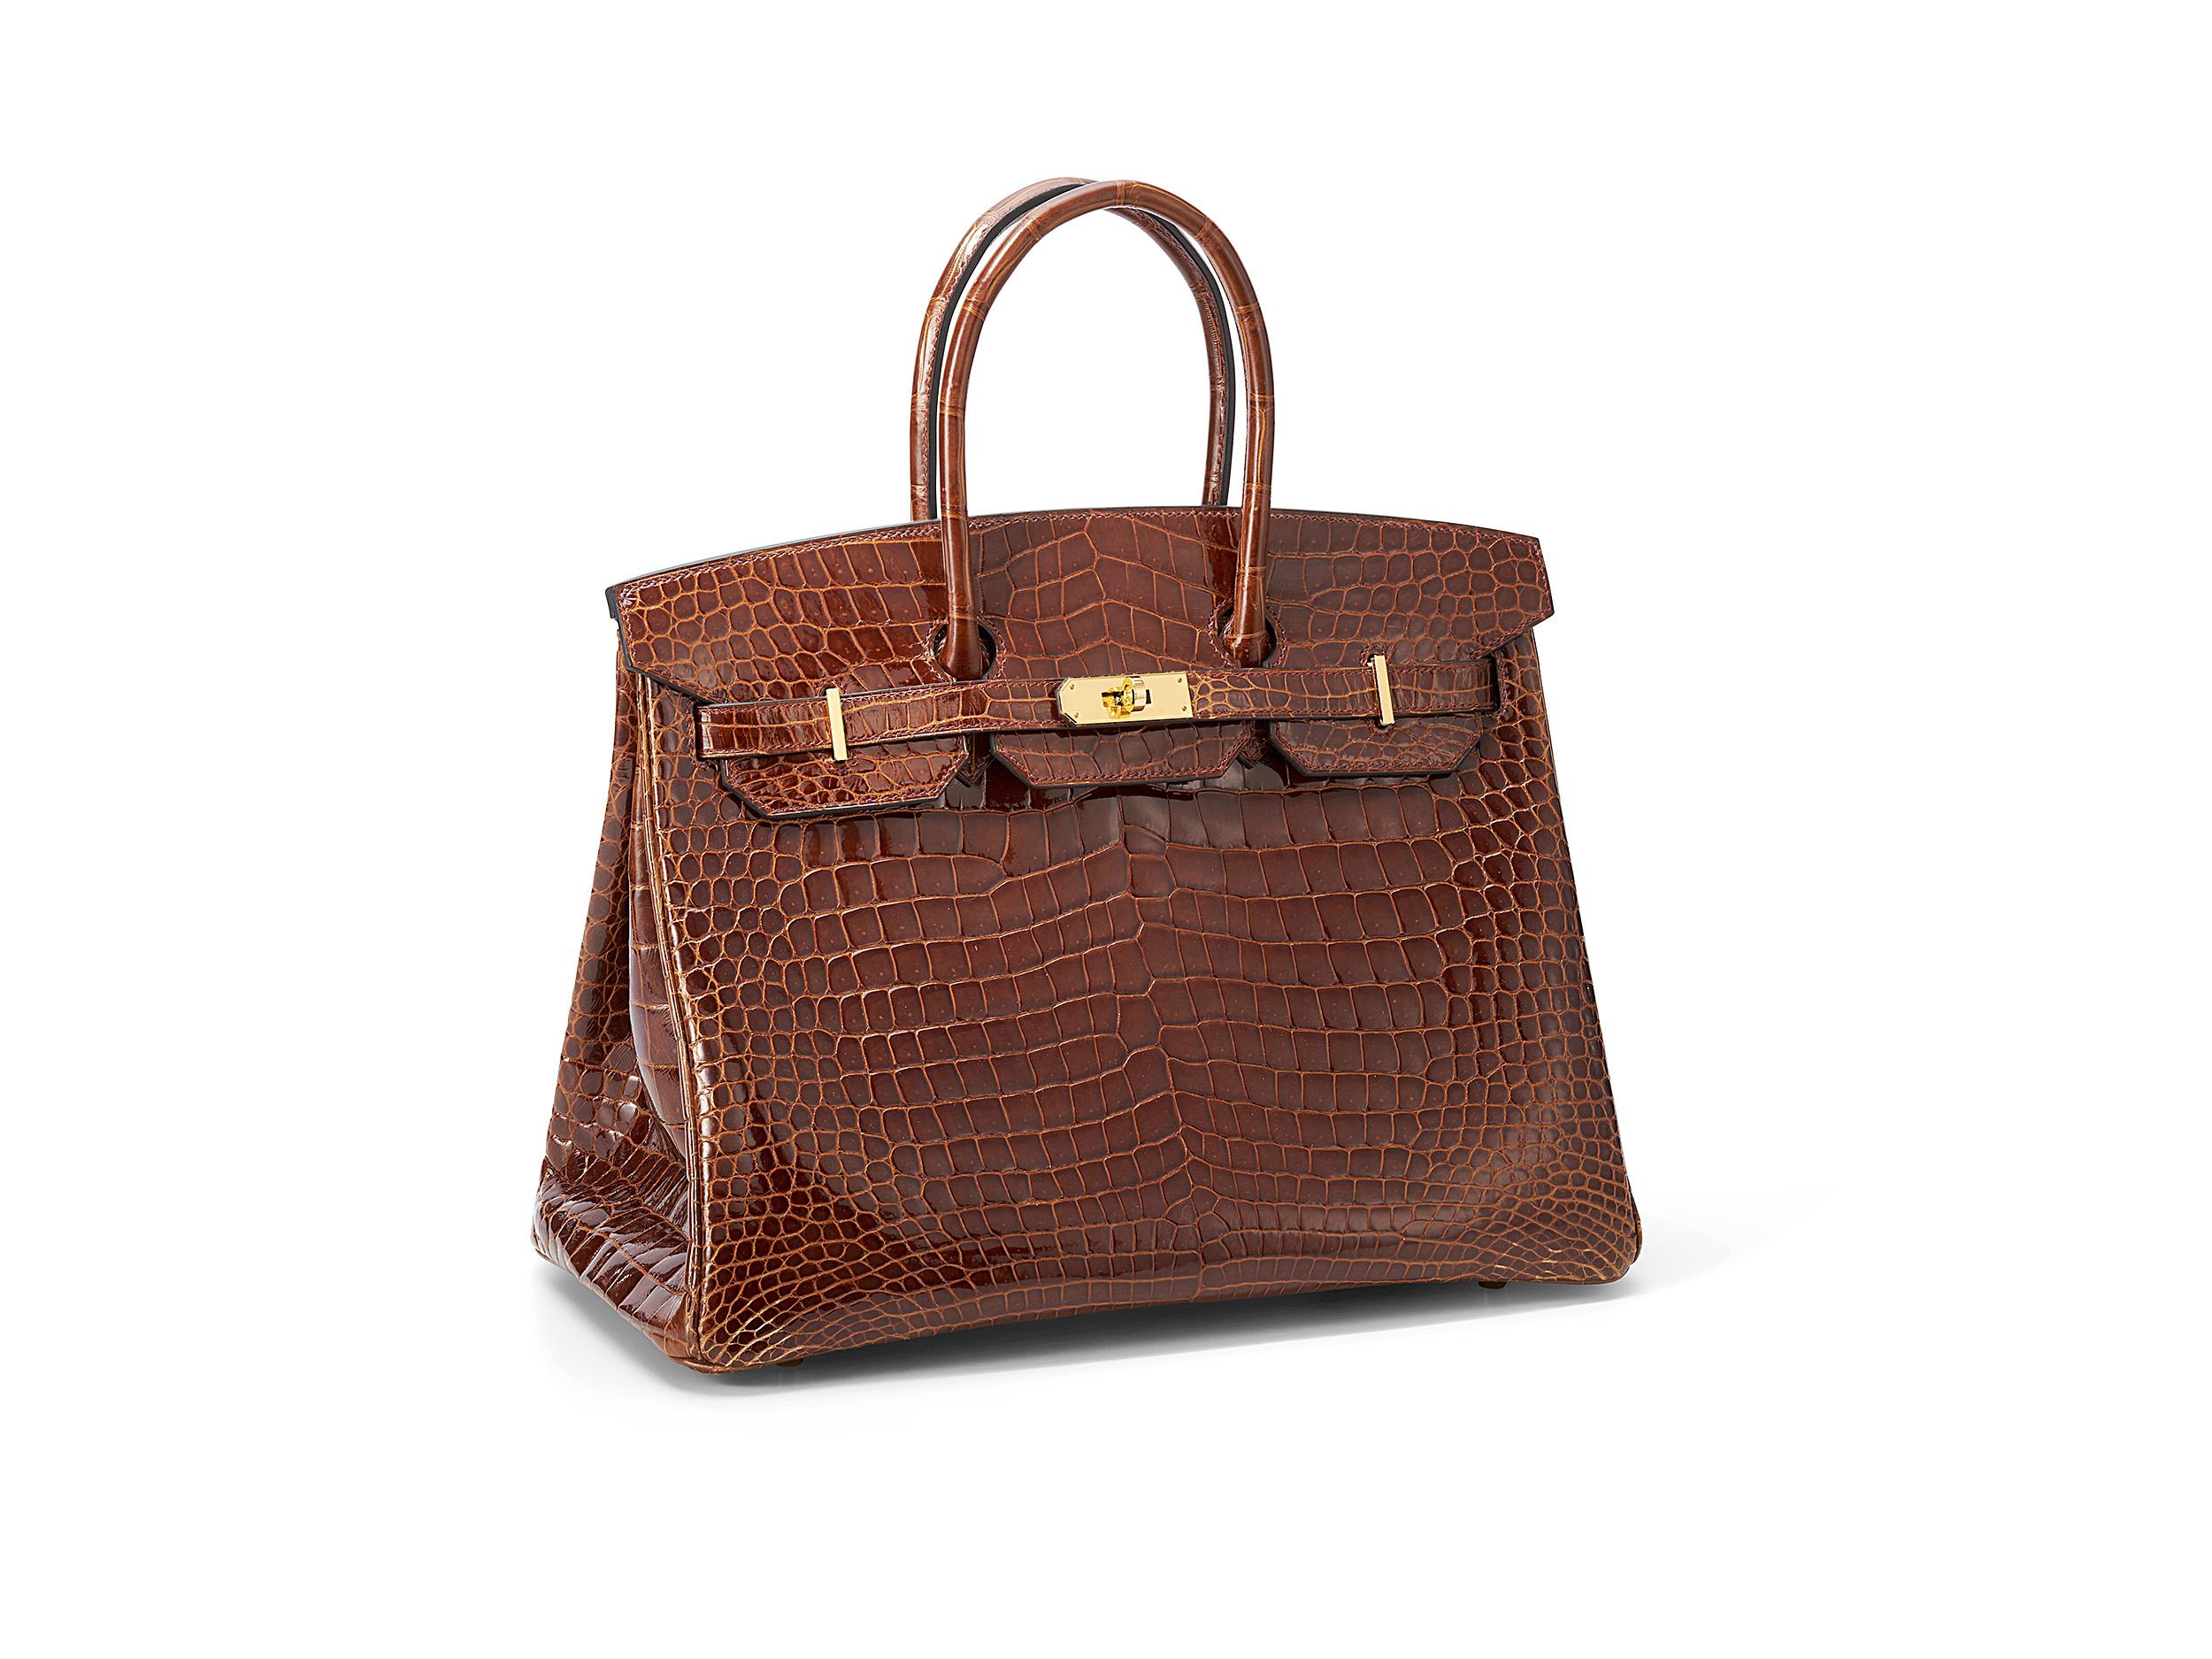 Hermès Birkin HSS 35 in honey and shiny crocodile porosus leather with gold hardware. The bag is in very good condition, has a small mark on one corner as pictured. Comes as full set including the original receipt and Cites.

Bags with a horse shoe